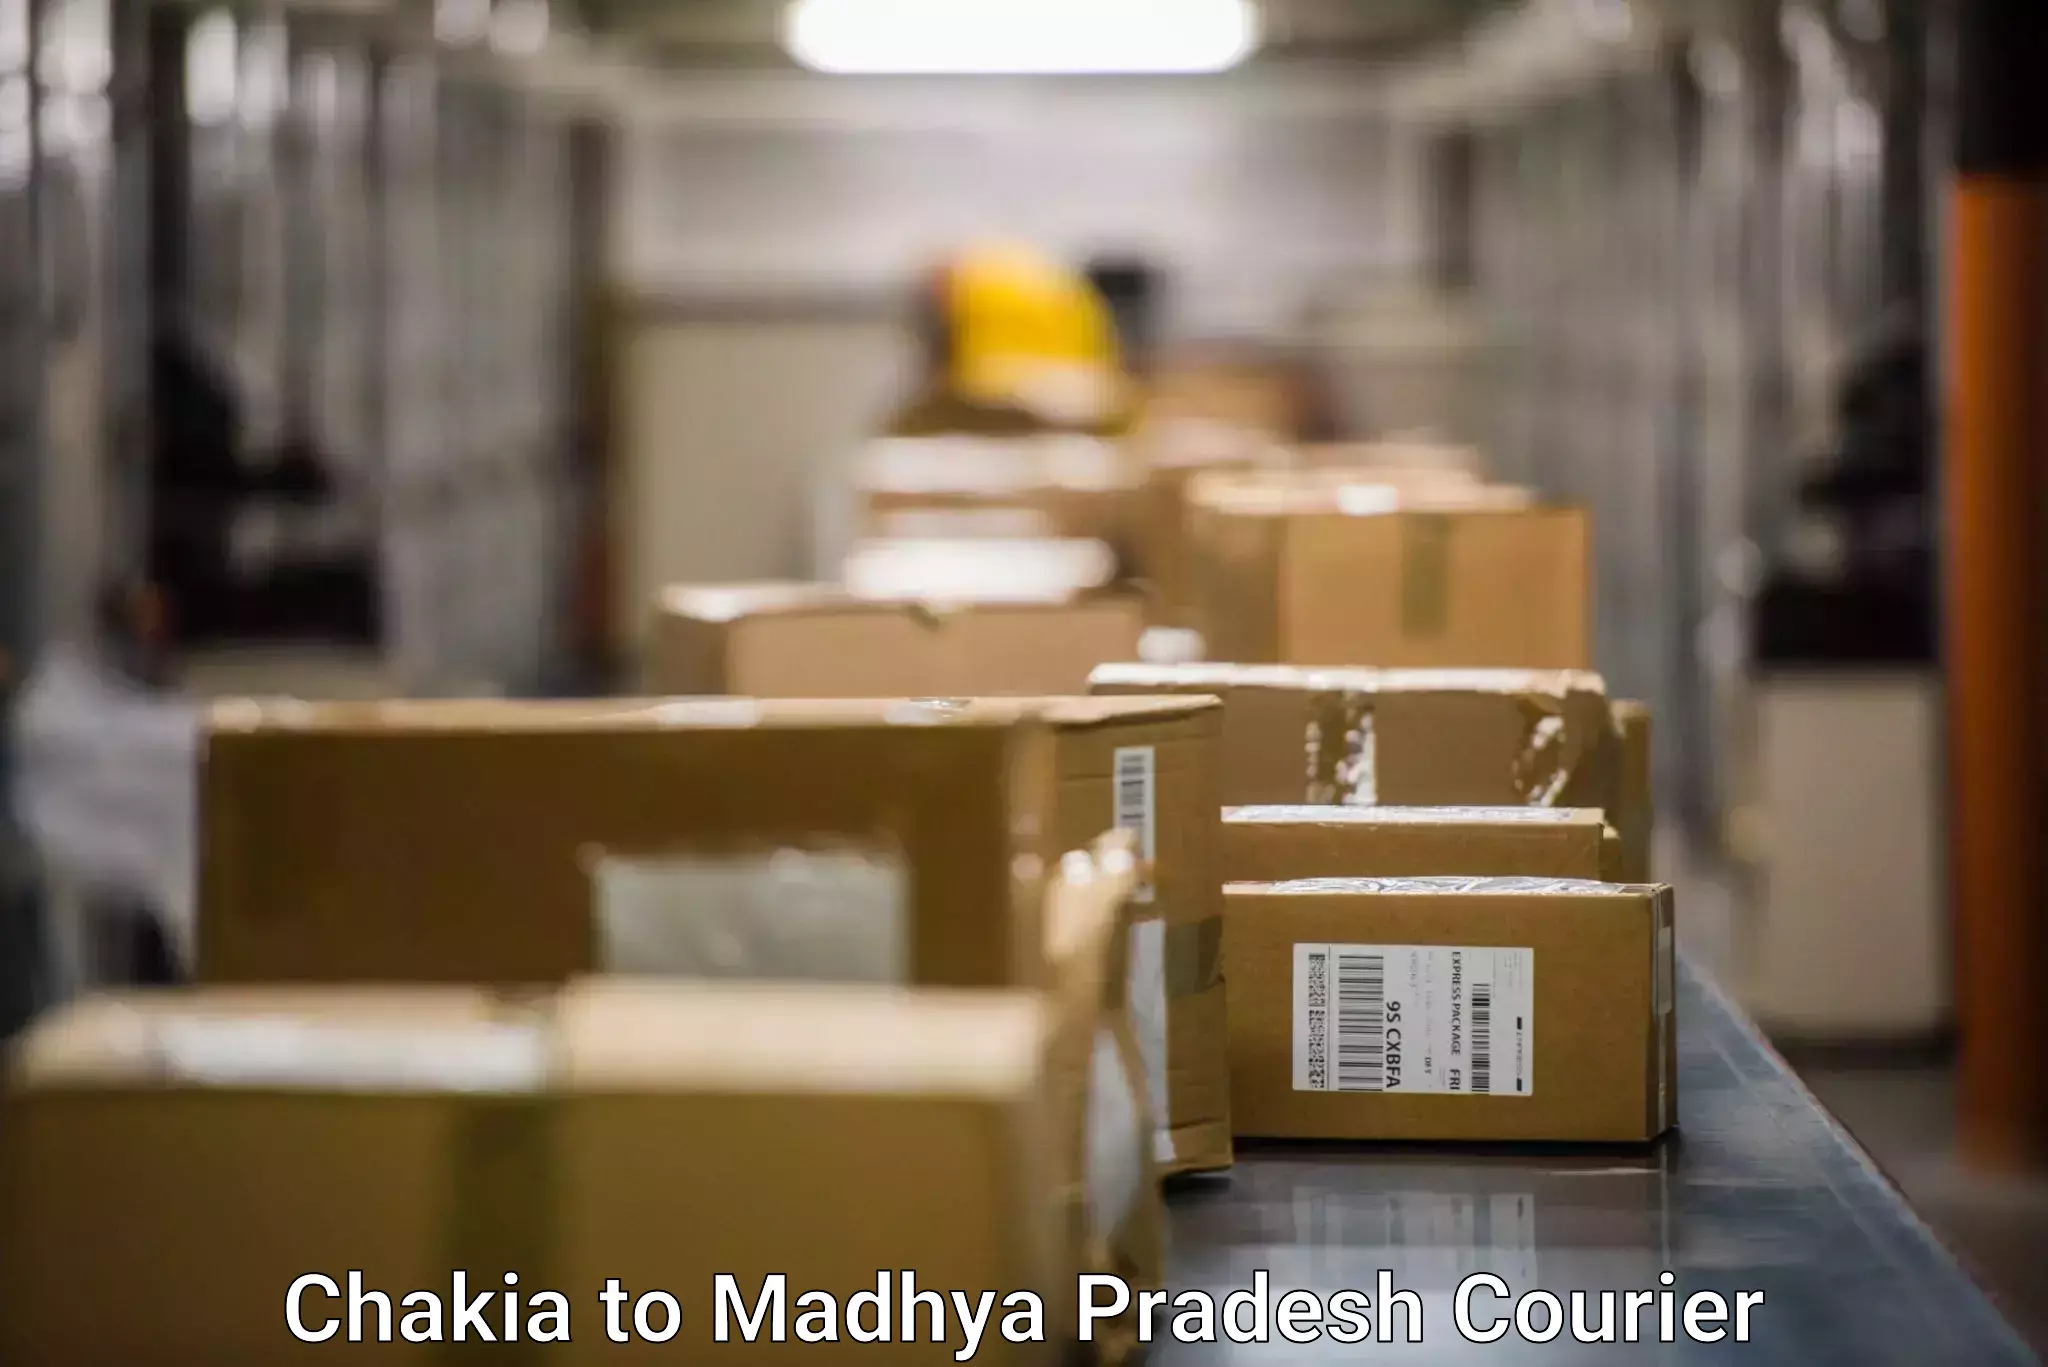 Courier service partnerships Chakia to Chanderi